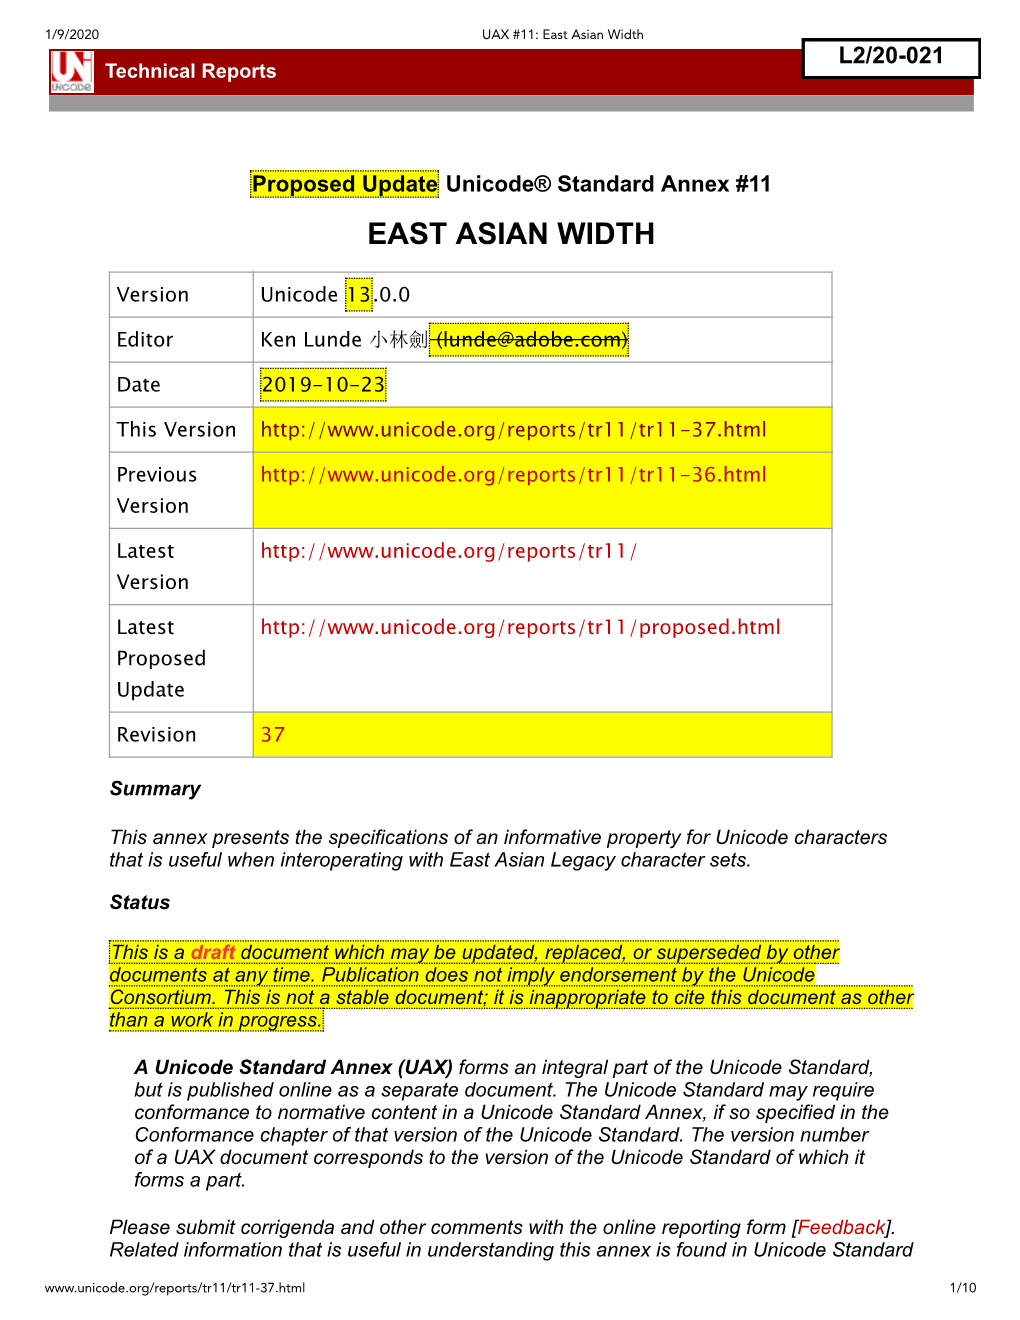 East Asian Width Technical Reports